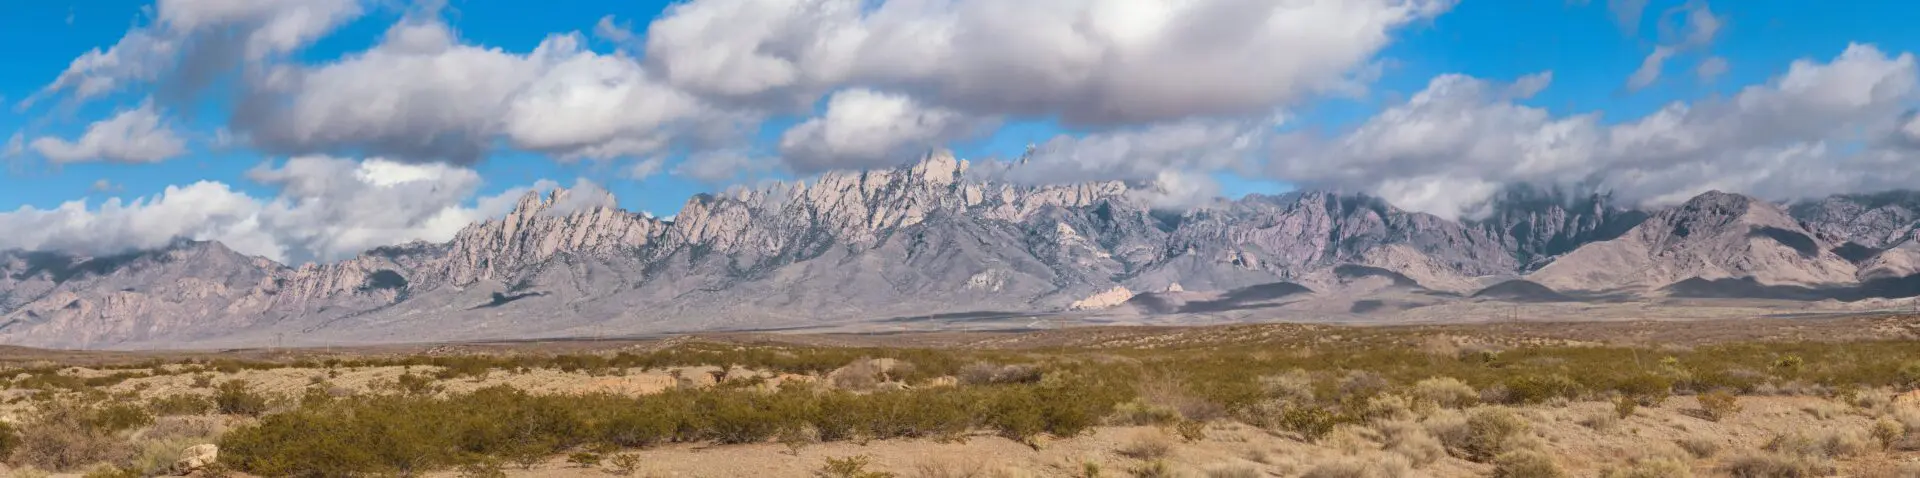 A desert with mountains in the background and clouds.